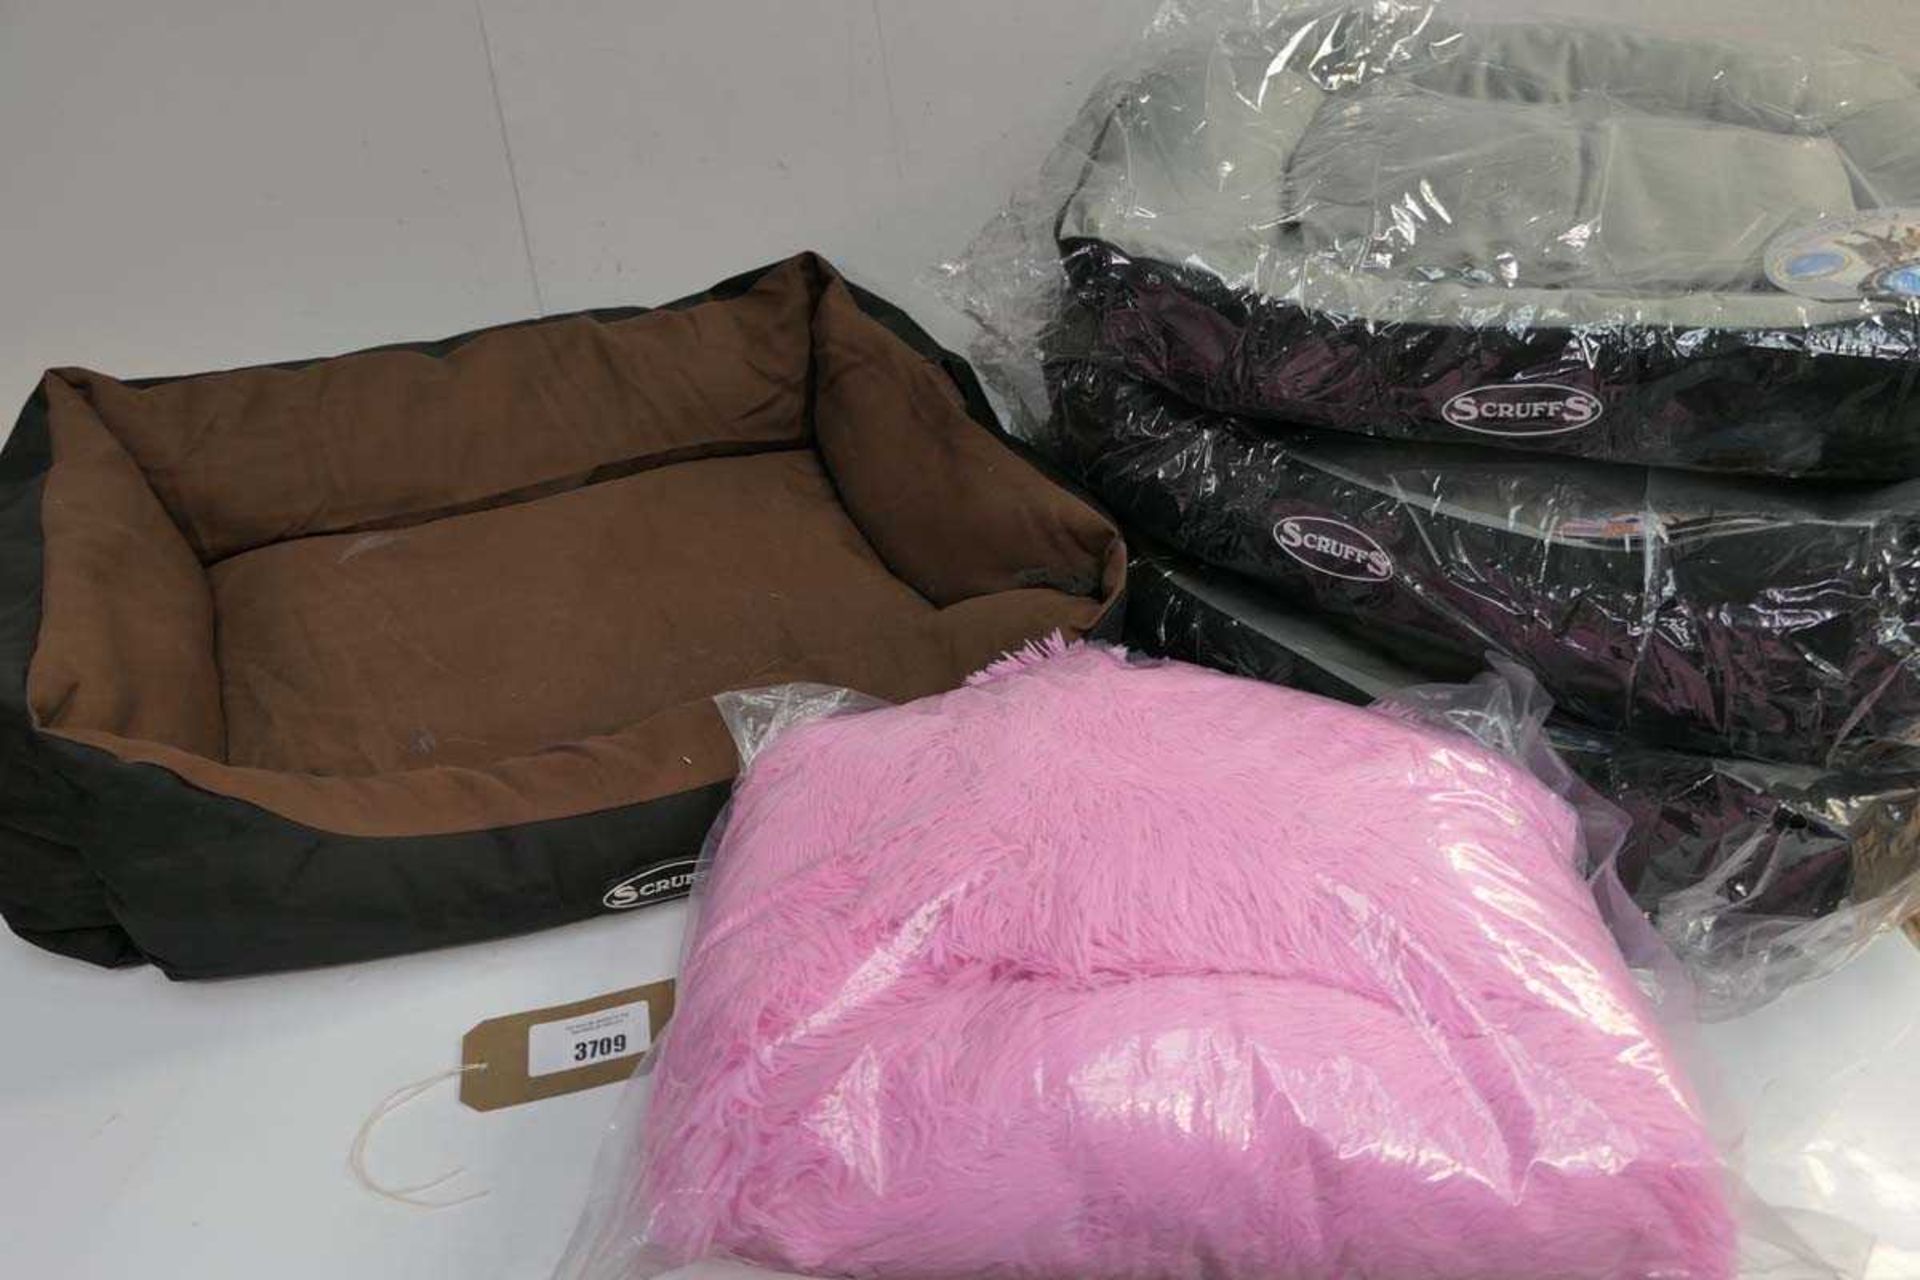 +VAT Selection of various Scruffs dog beds together with pink fluffy bed